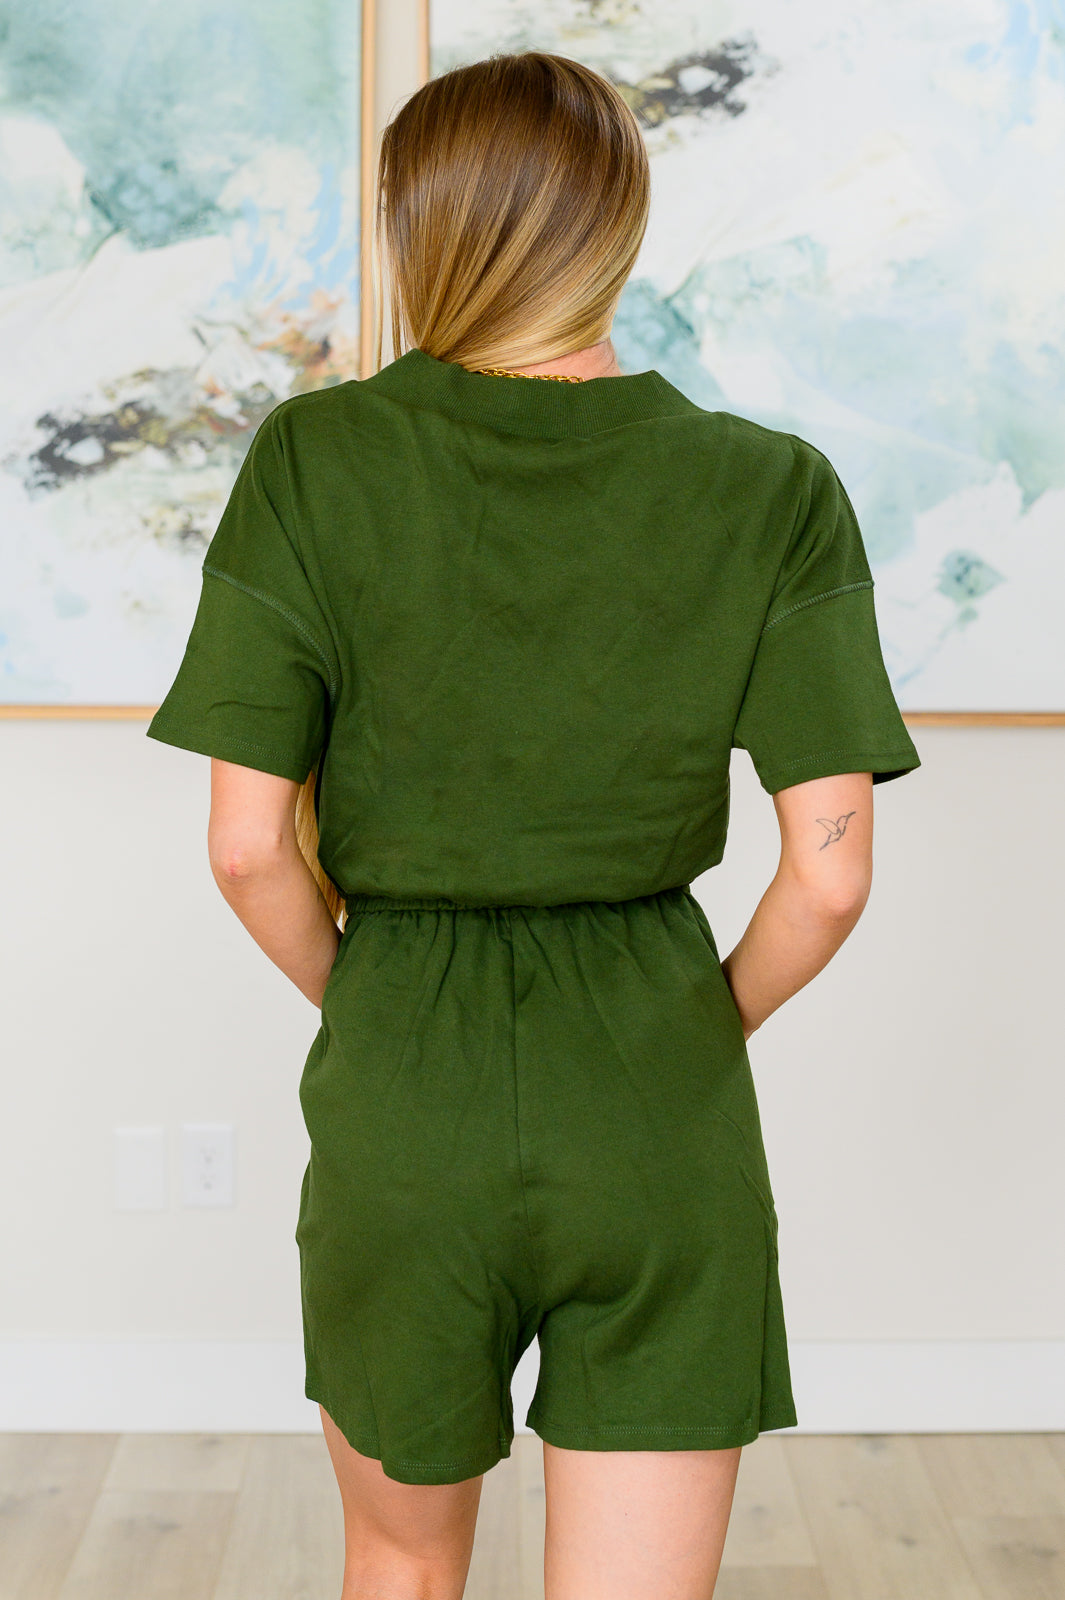 Short Sleeve V-Neck Romper in Army Green-Jumpsuits & Rompers-Ave Shops-Market Street Nest, Fashionable Clothing, Shoes and Home Décor Located in Mabank, TX